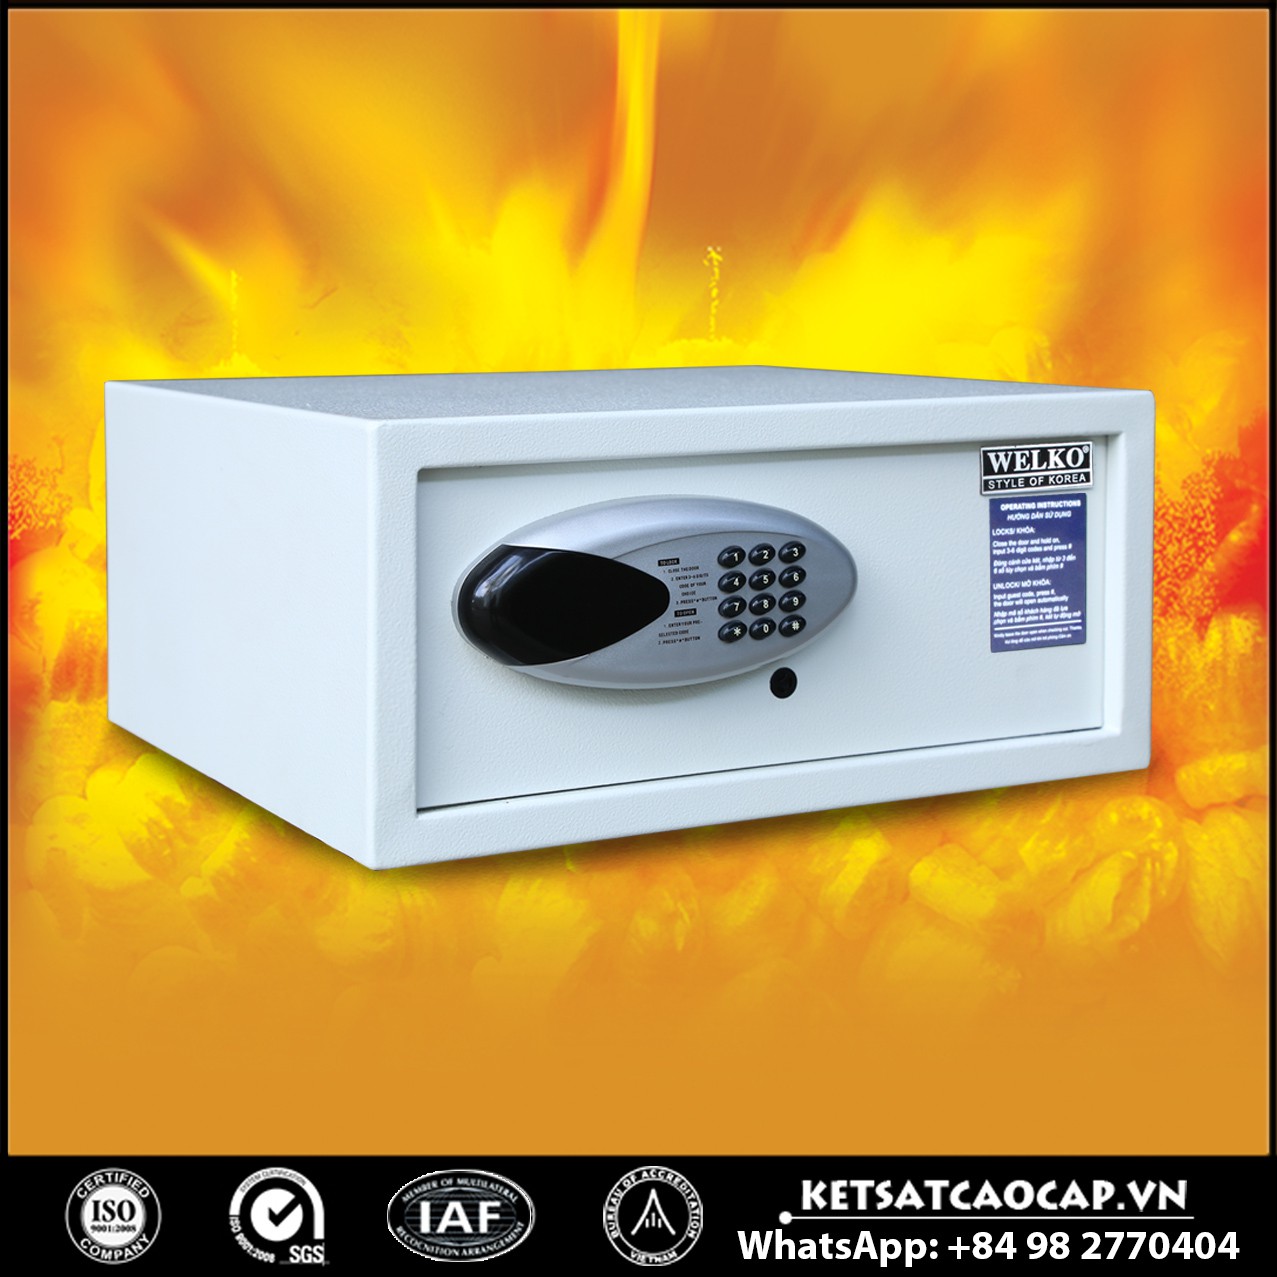 Hotel Safety Deposit Box Manufacturers Factory